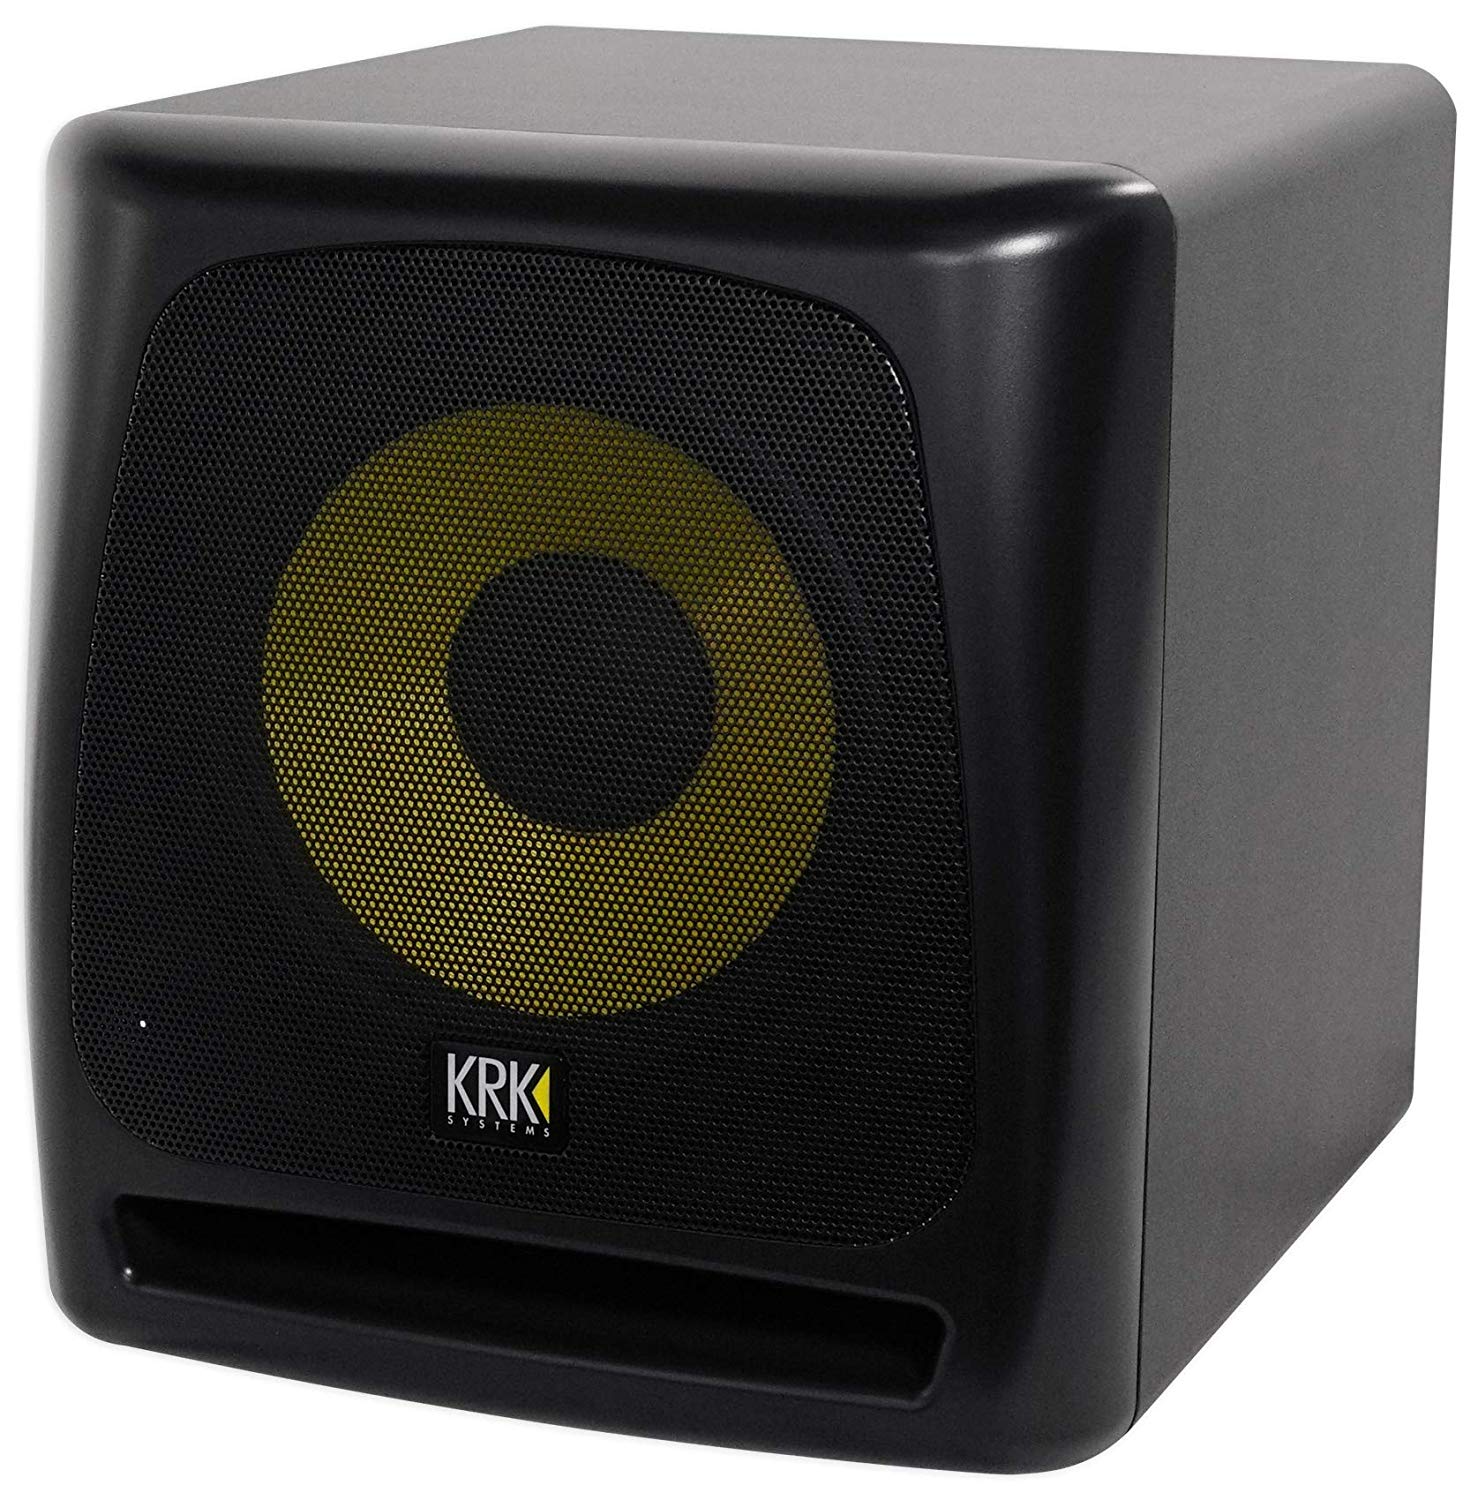 KRK 10s Review – Bring Audible Low End to Your Studio